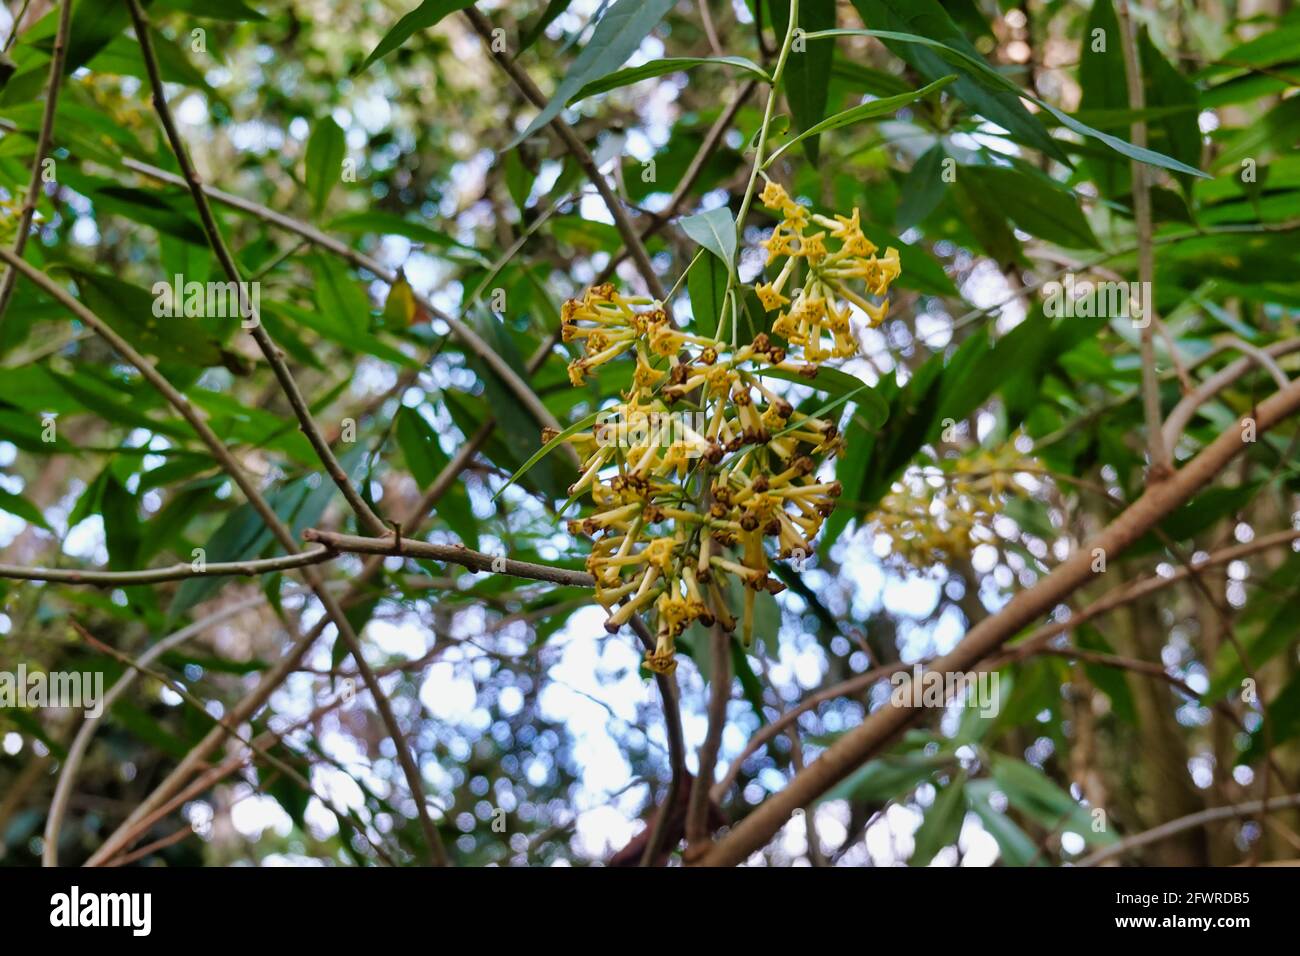 Low angle shot of Chilean jessamine on a tree branch Stock Photo